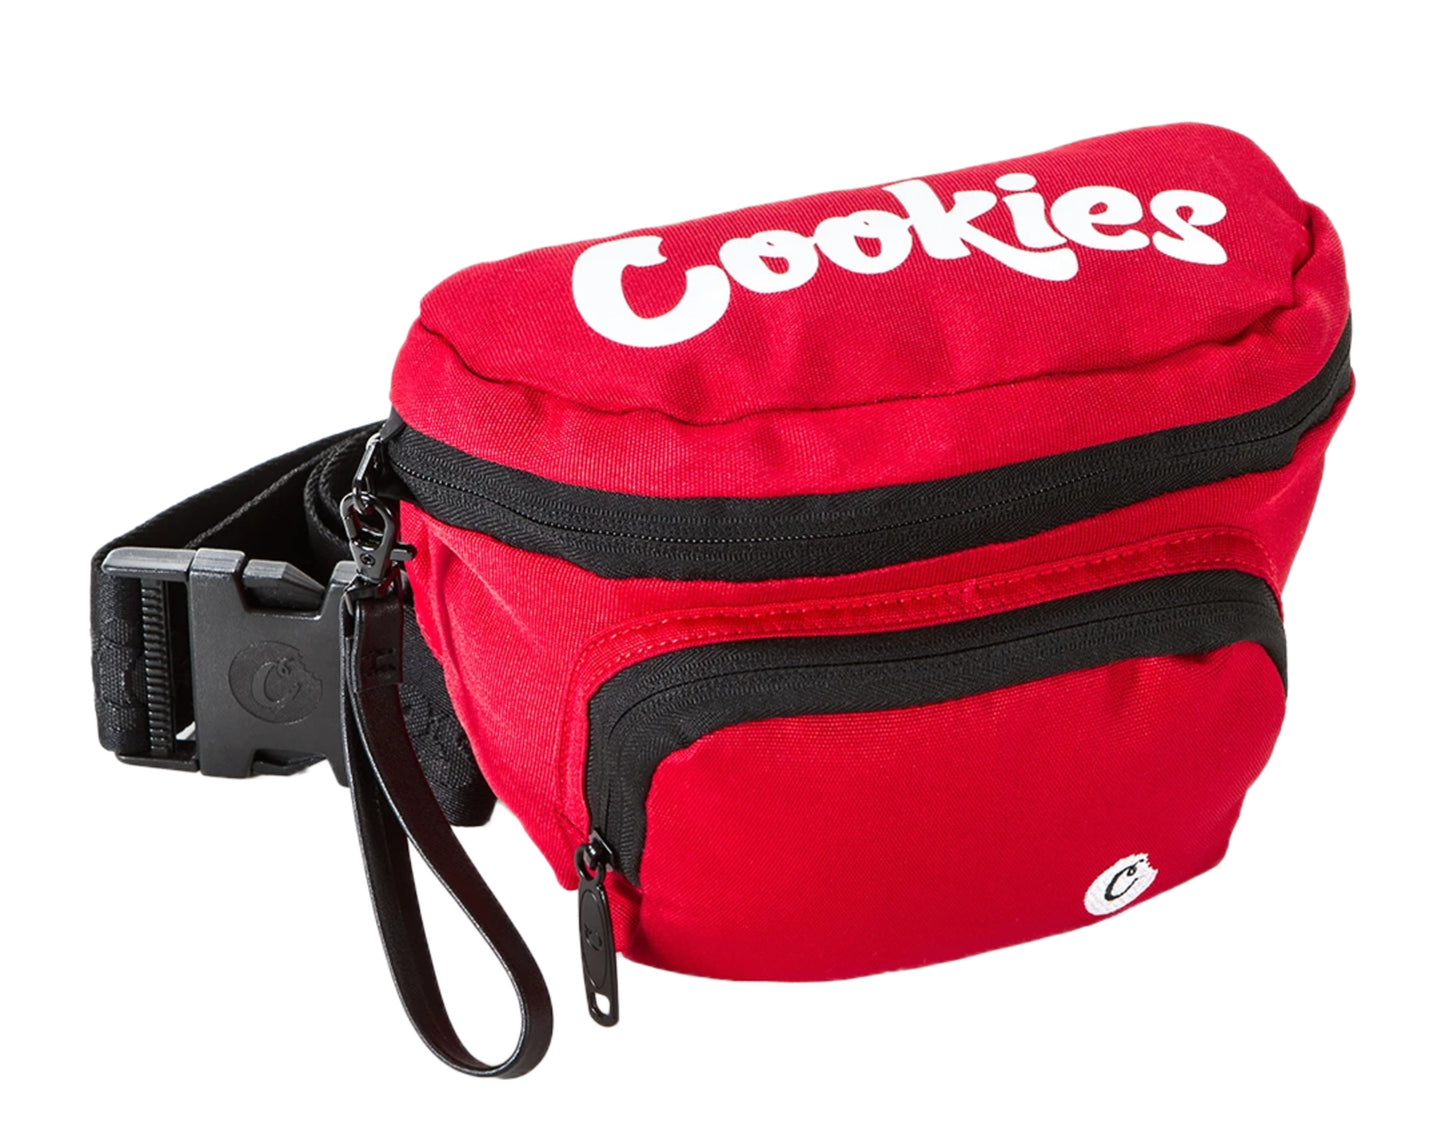 Cookies Environmental Nylon Smell Proof Red Fanny Pack 1546A4402-RED